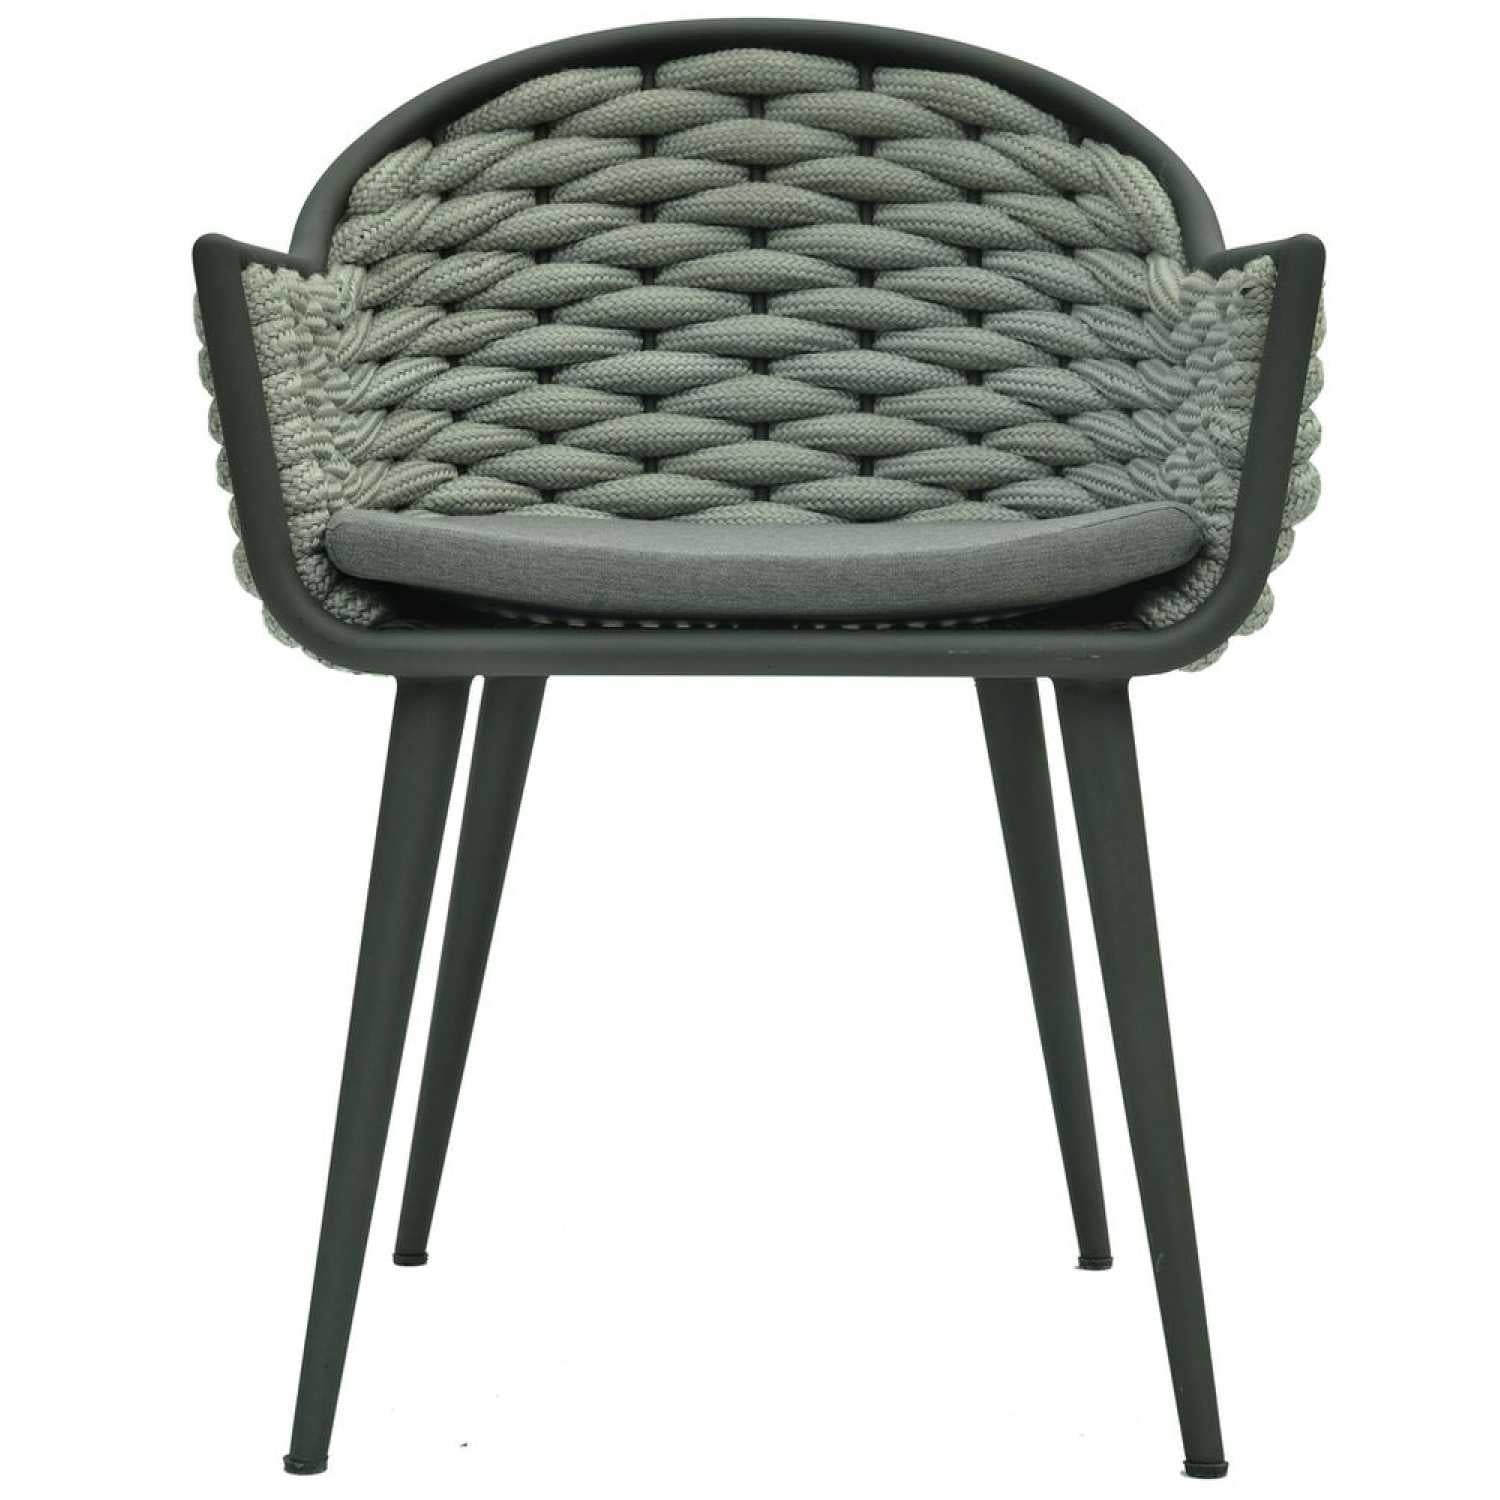 Serpent Dining Chair - PadioLiving - Serpent Dining Chair - Outdoor Dining Chair - Silver Grey 38mm Poly Rope / Metal-Grafito (£733) - PadioLiving